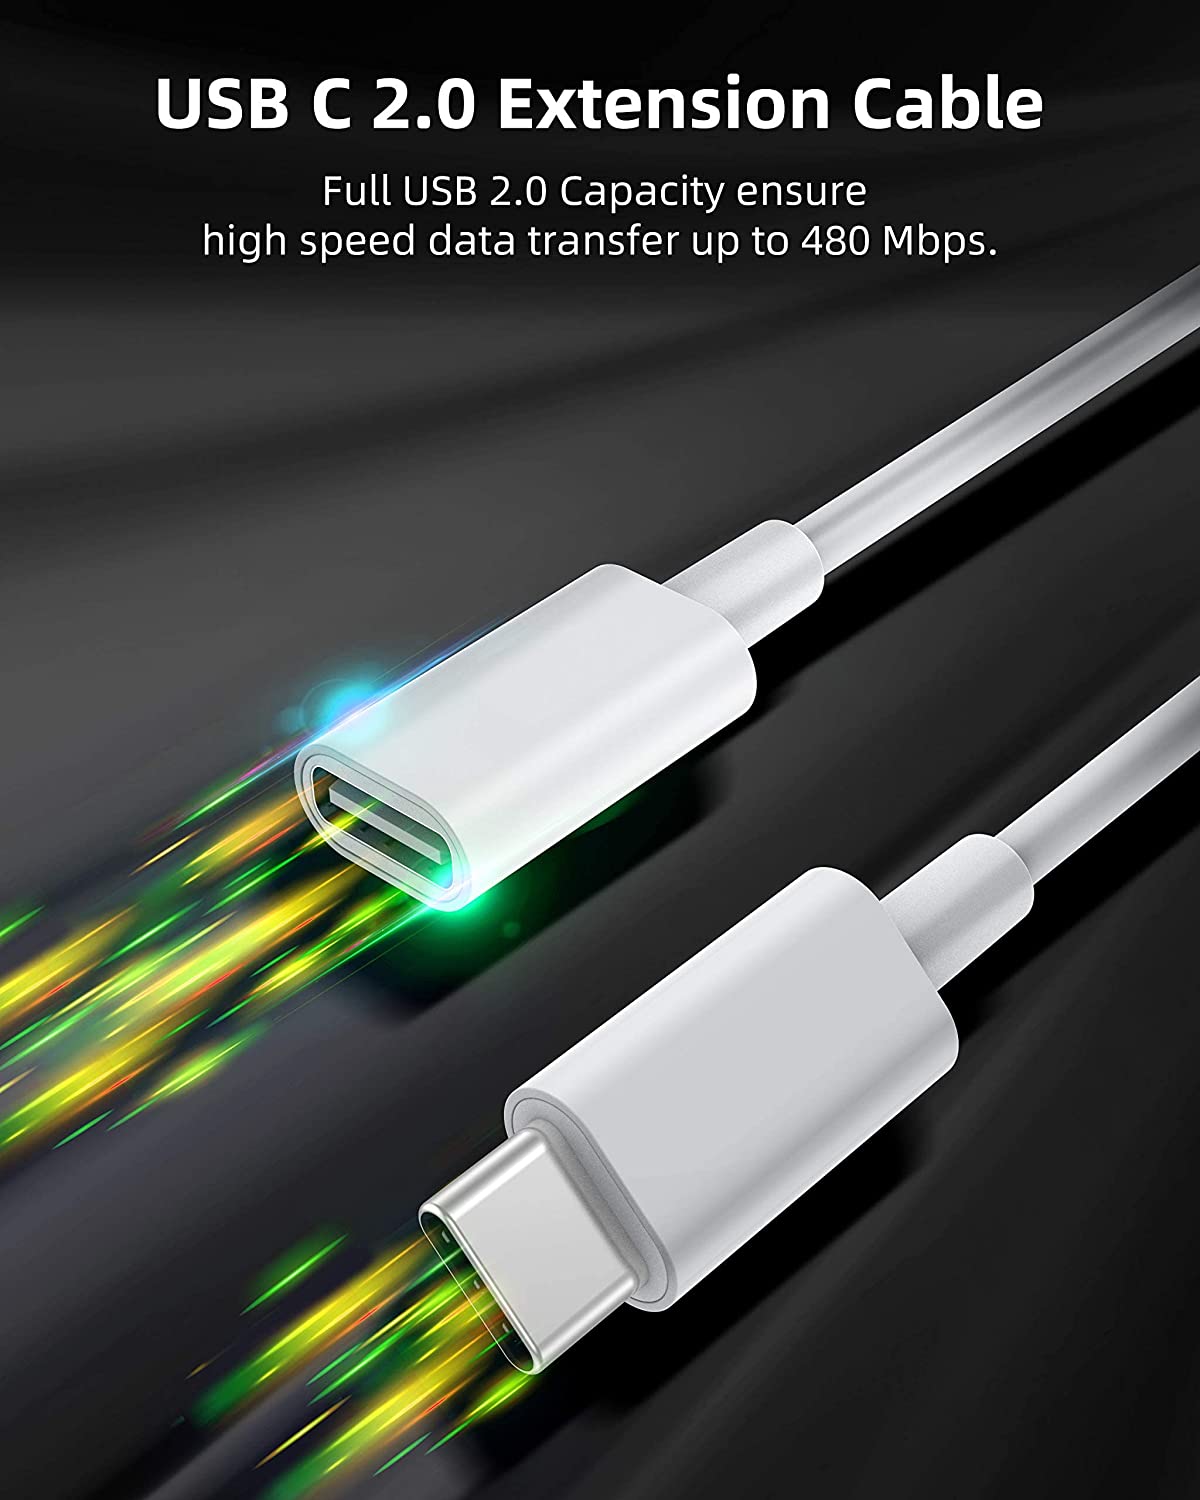 HF-6FTUCMUCF: USB C Extension Cable 6 FT/1.8M, 9V 3A USB Type C Female to Male Extension Cable for Mag- Safe Charger